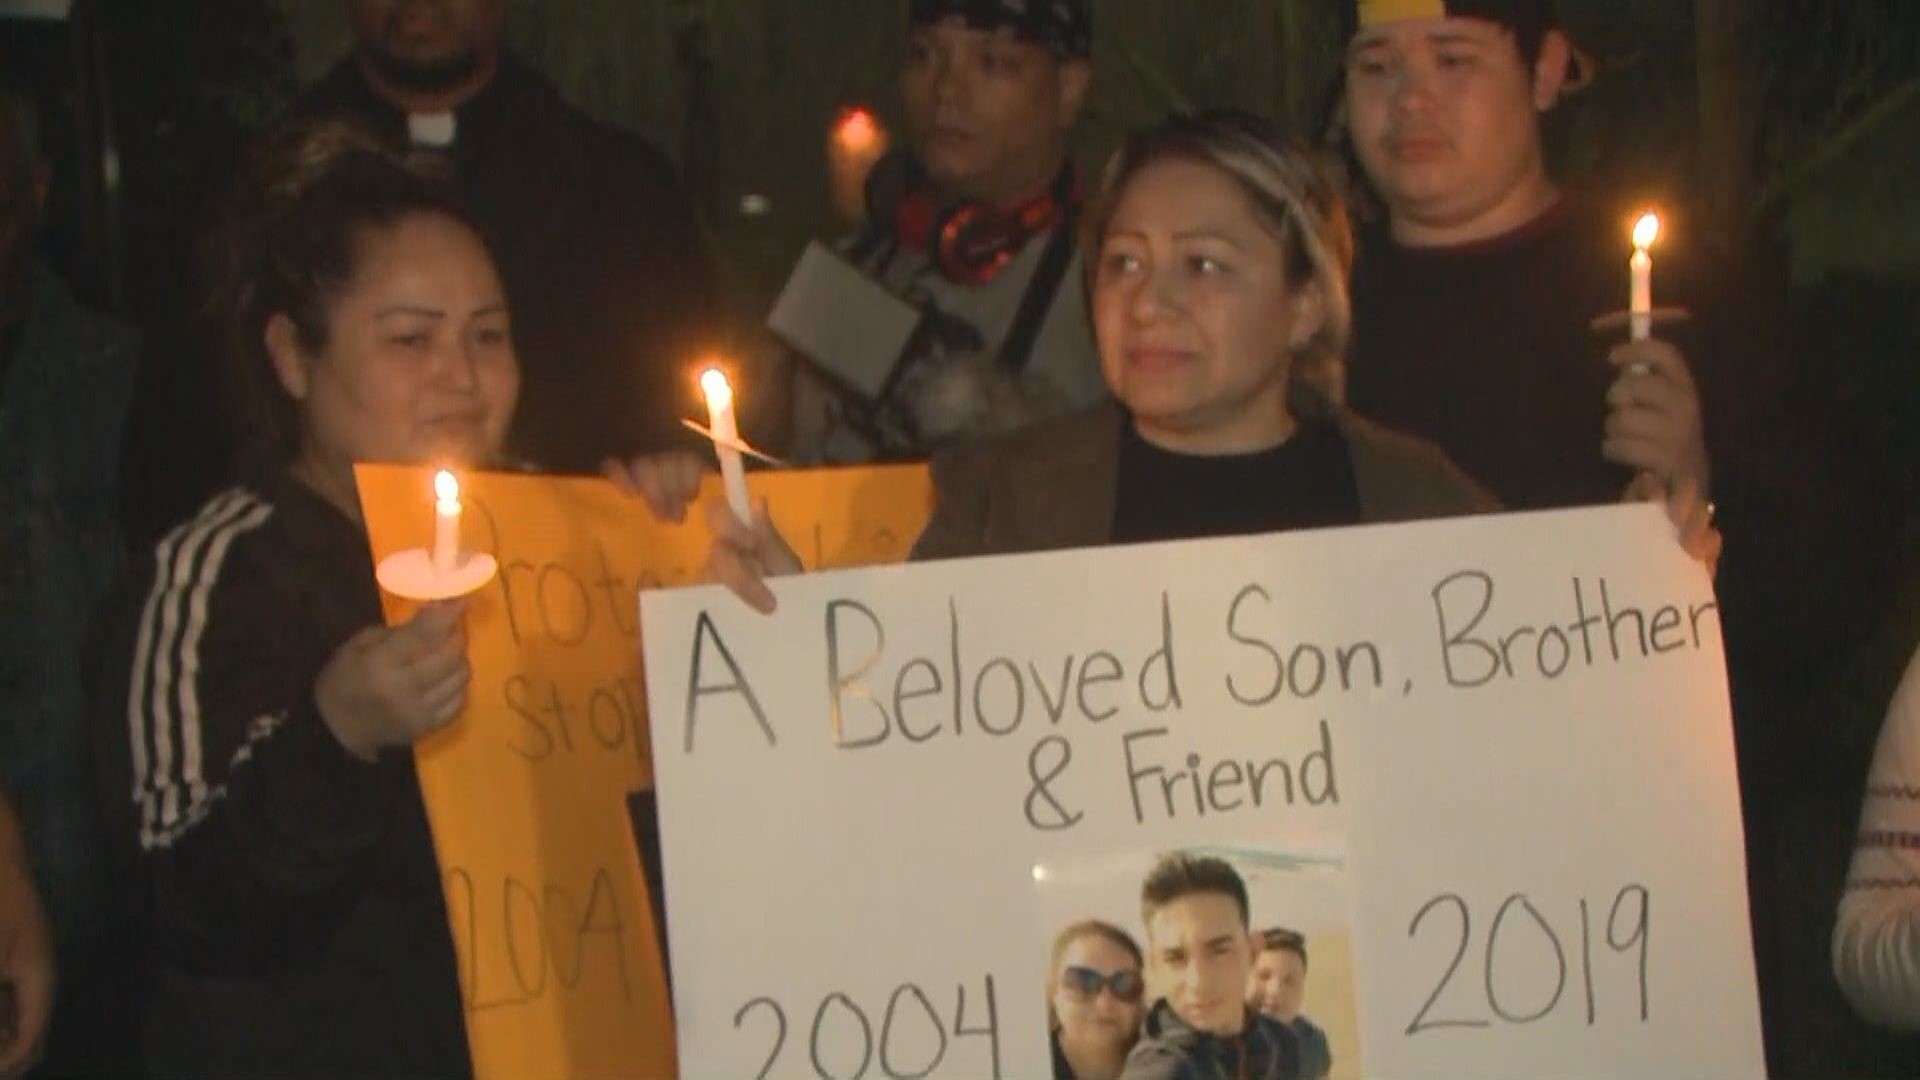 A crowd of people showed up outside Tempe police headquarters Thursday night to protest the shooting death of a 14-year-old burglary suspect Tuesday afternoon.